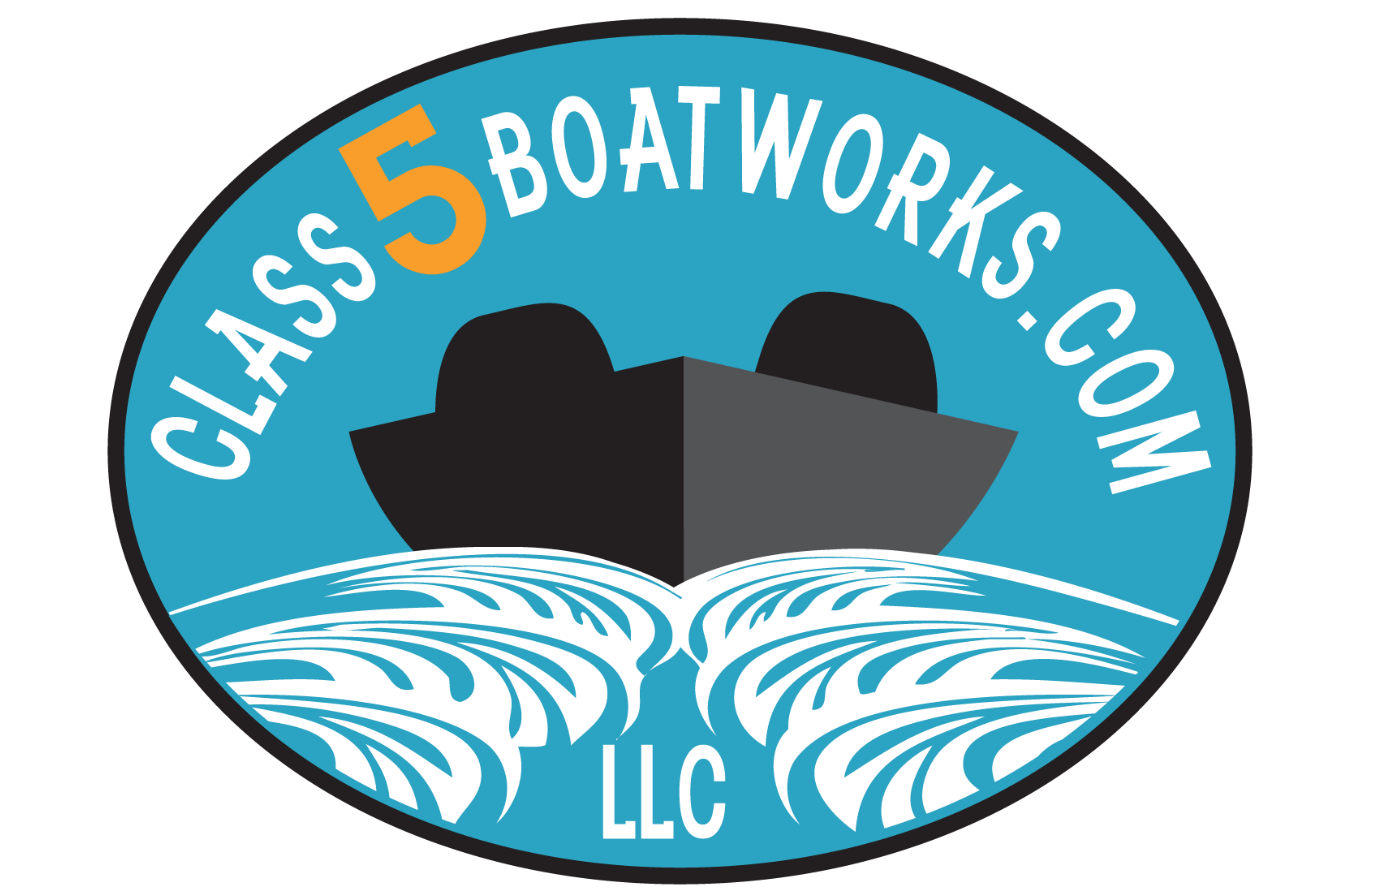 class 5 boatworks logo.png